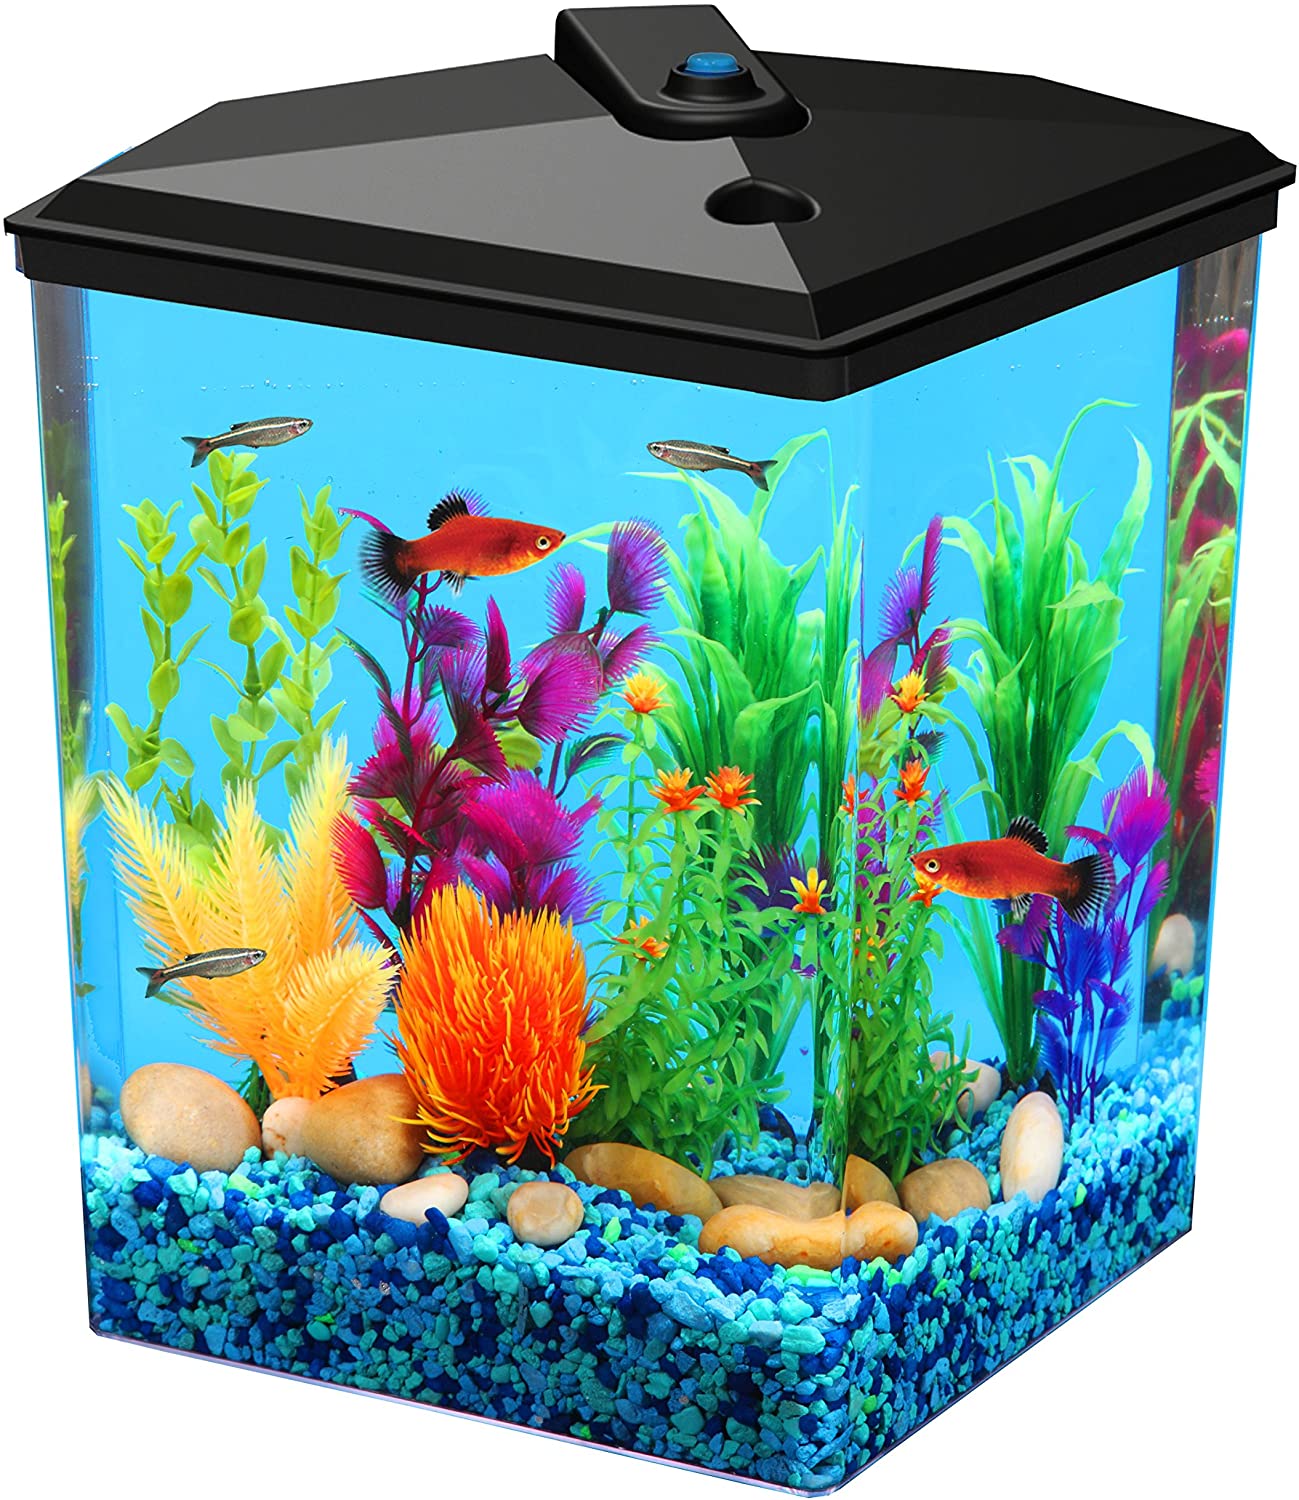 2.5 Gallon Fish Tanks - Options and Reviews 2020 | A Little Bit Fishy